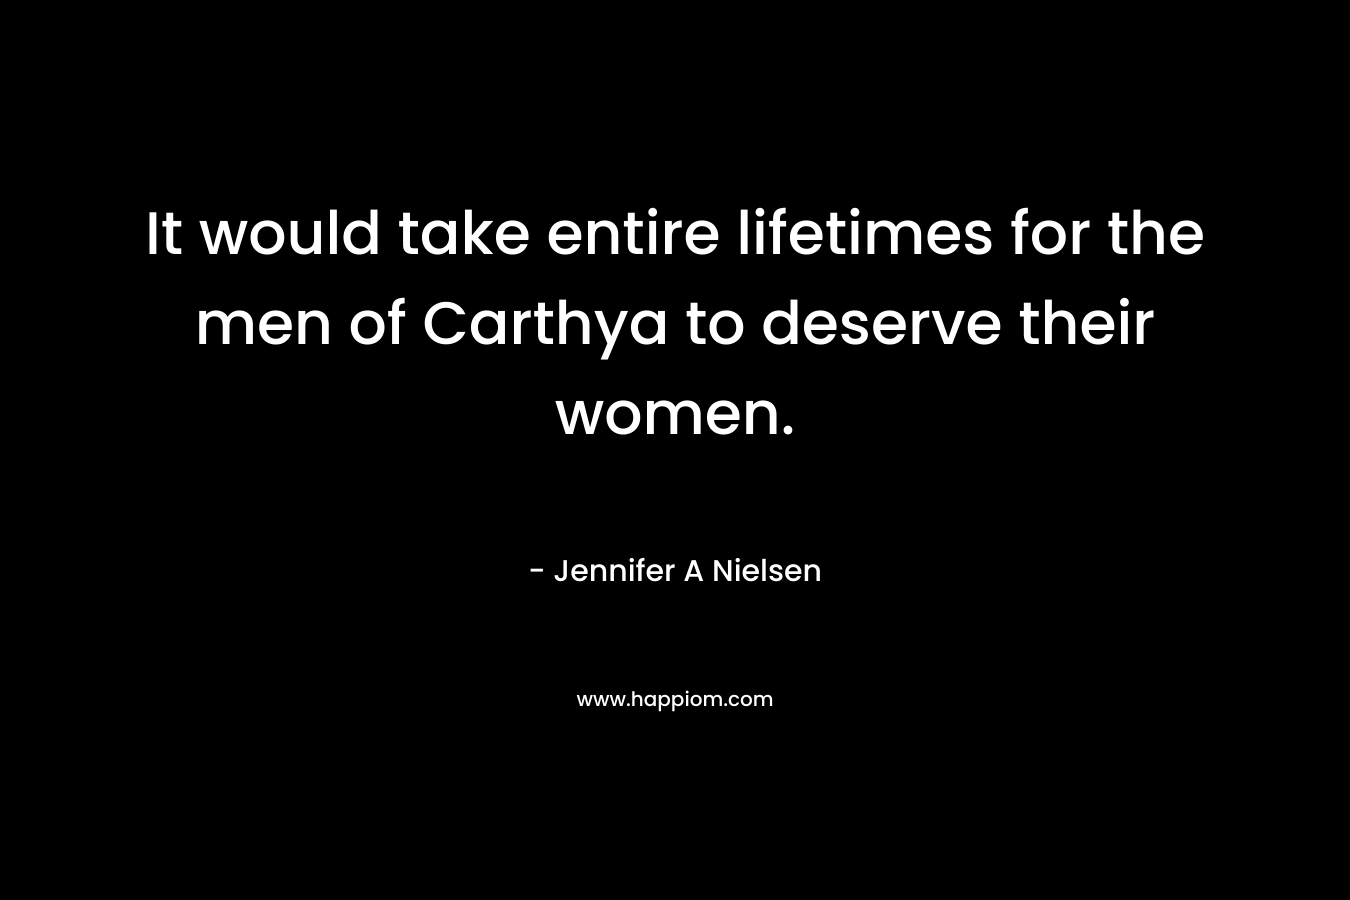 It would take entire lifetimes for the men of Carthya to deserve their women.